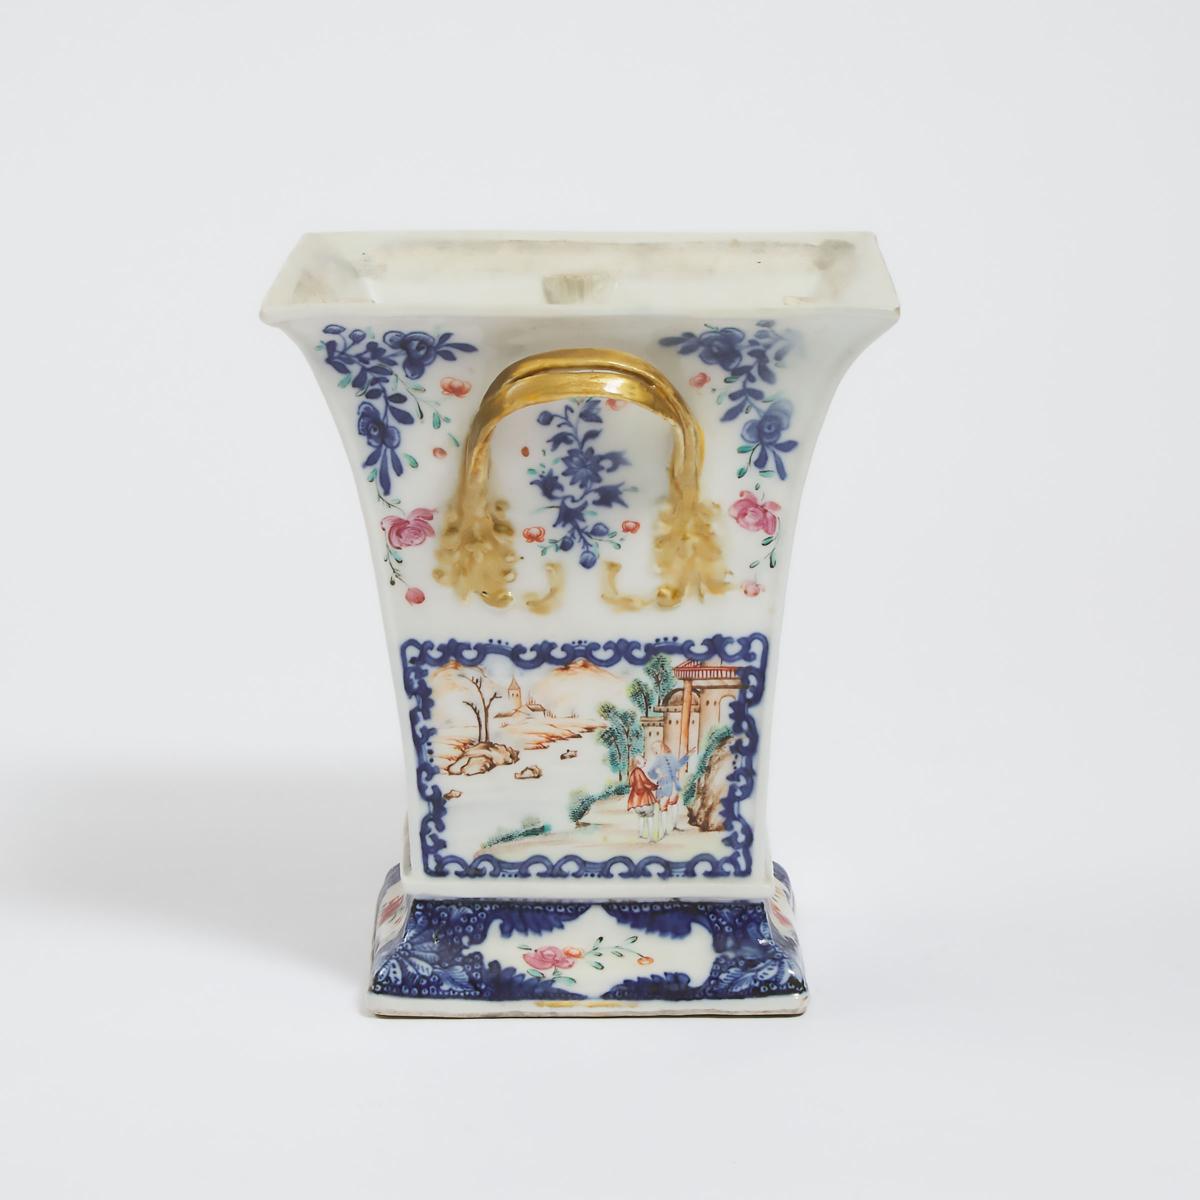 A Chinese Export Blue and White Famille Rose Bough Pot, Late 18th Century, 十八世纪 乾隆外销粉彩人物纹花插, height - Image 4 of 4